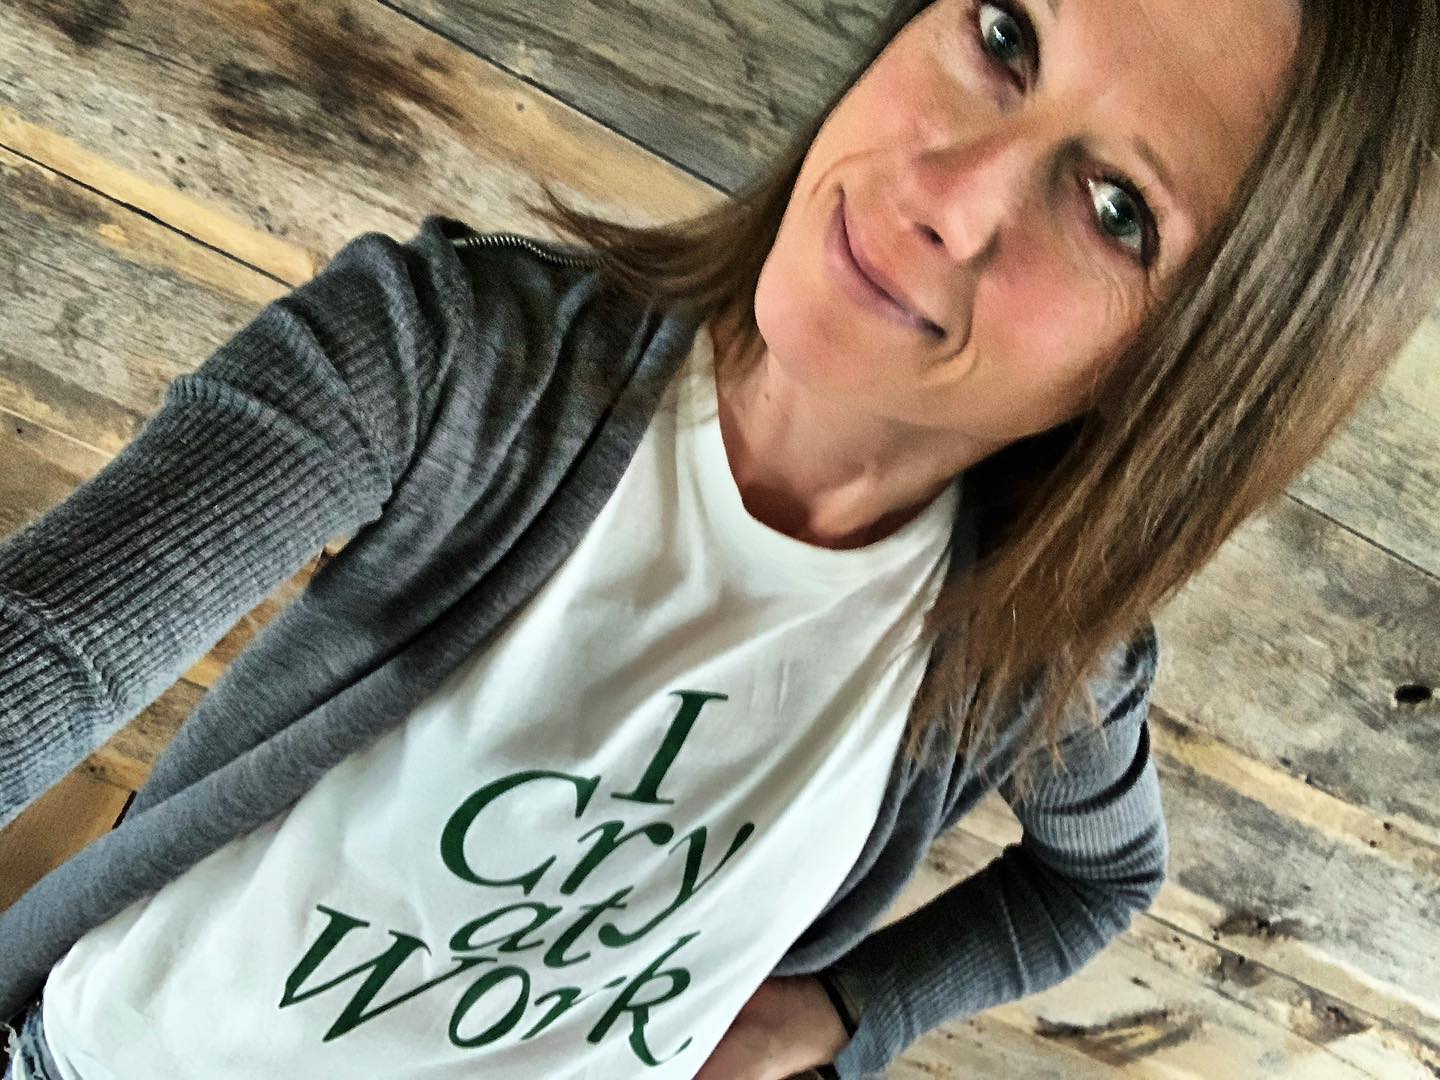 Just ask the 70 construction guys that work for me  this shirt has been a source of great amusement...but even more fitting when you are the ONLY girl in your company!! I can say it’s happened a few times...
@mumsflowersmt whitefish custom home builder